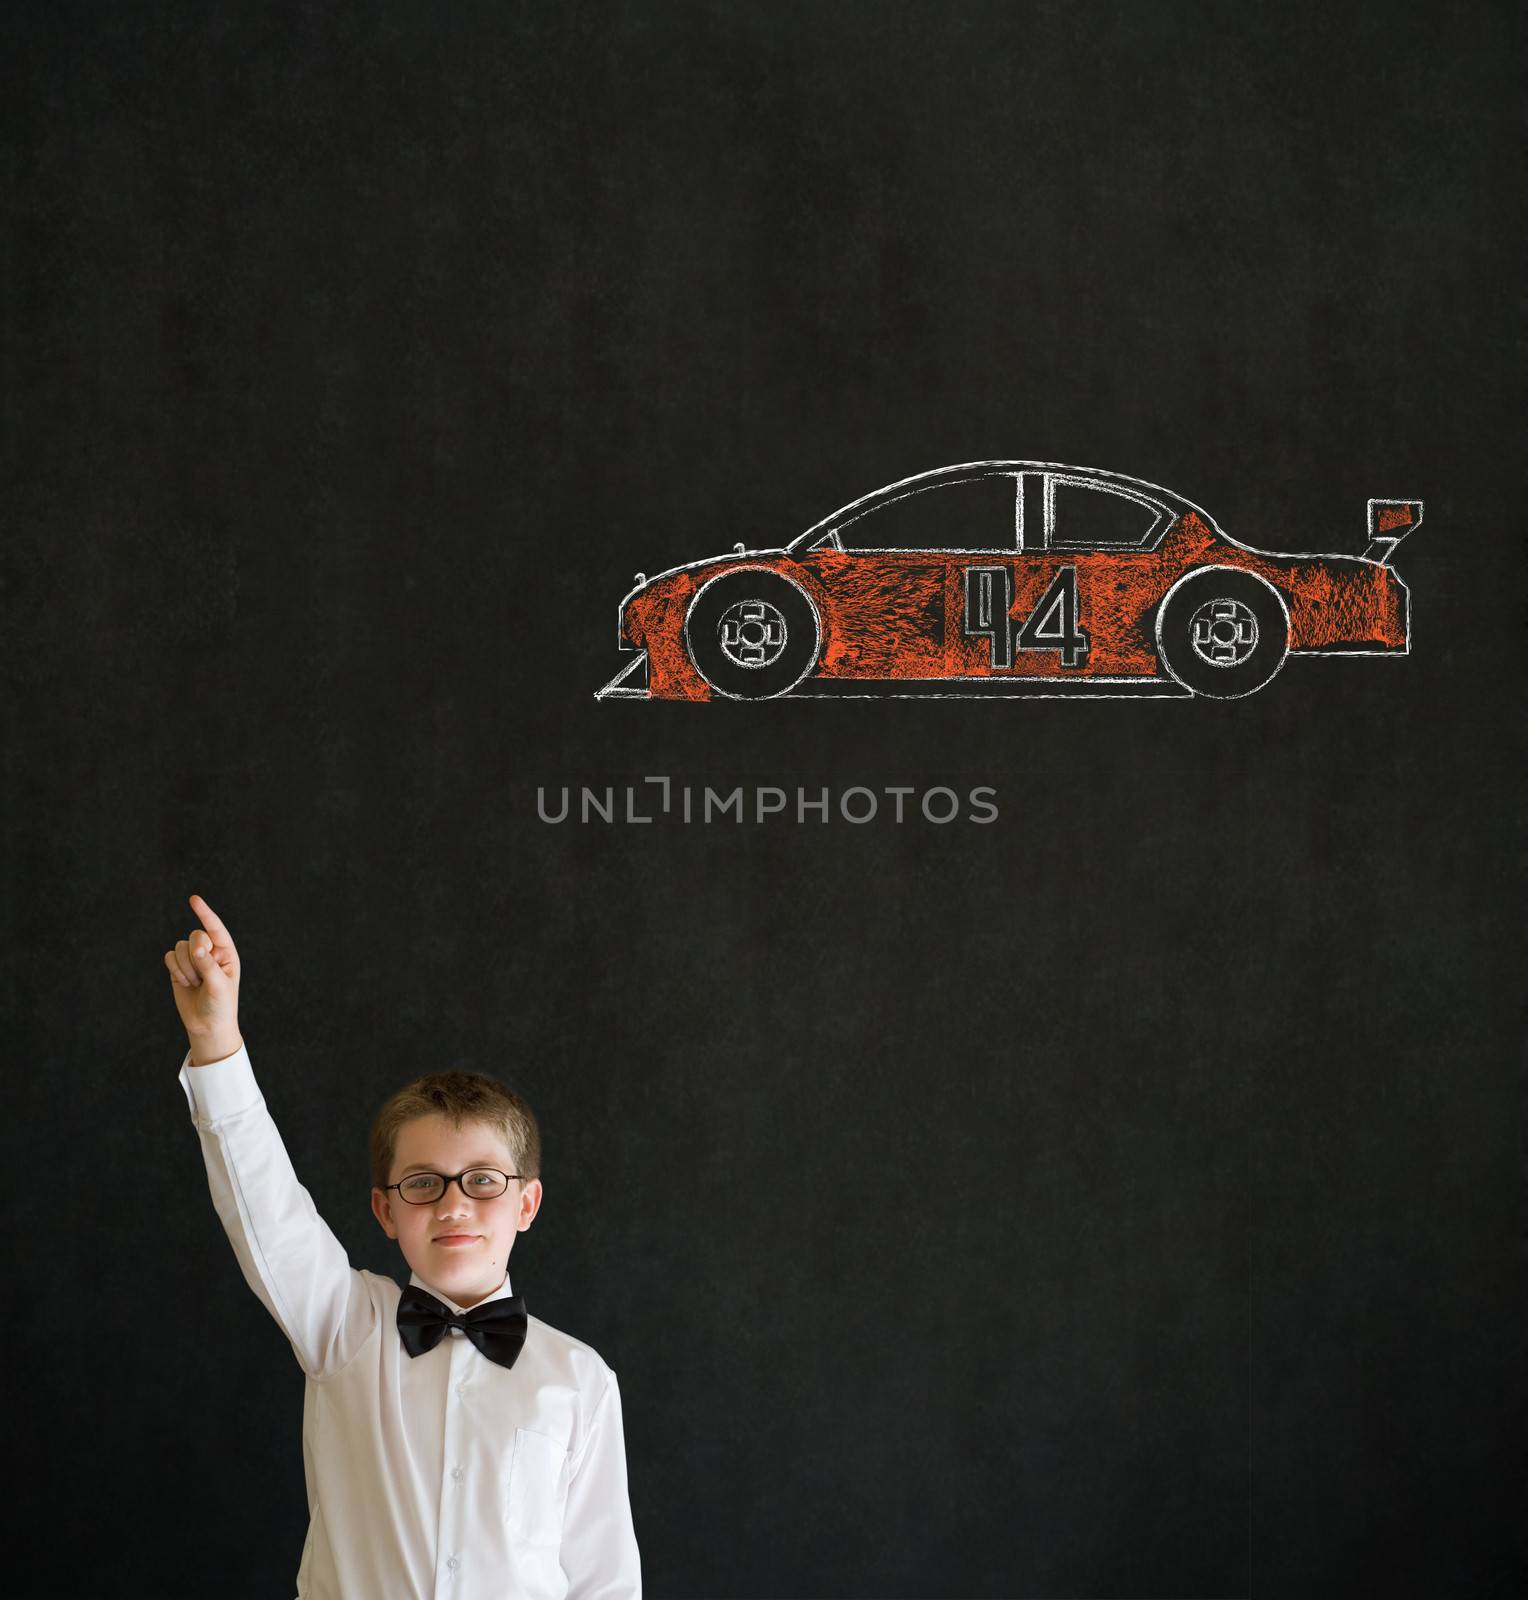 Hand up answer boy dressed up as business man with Nascar racing fan car on blackboard background